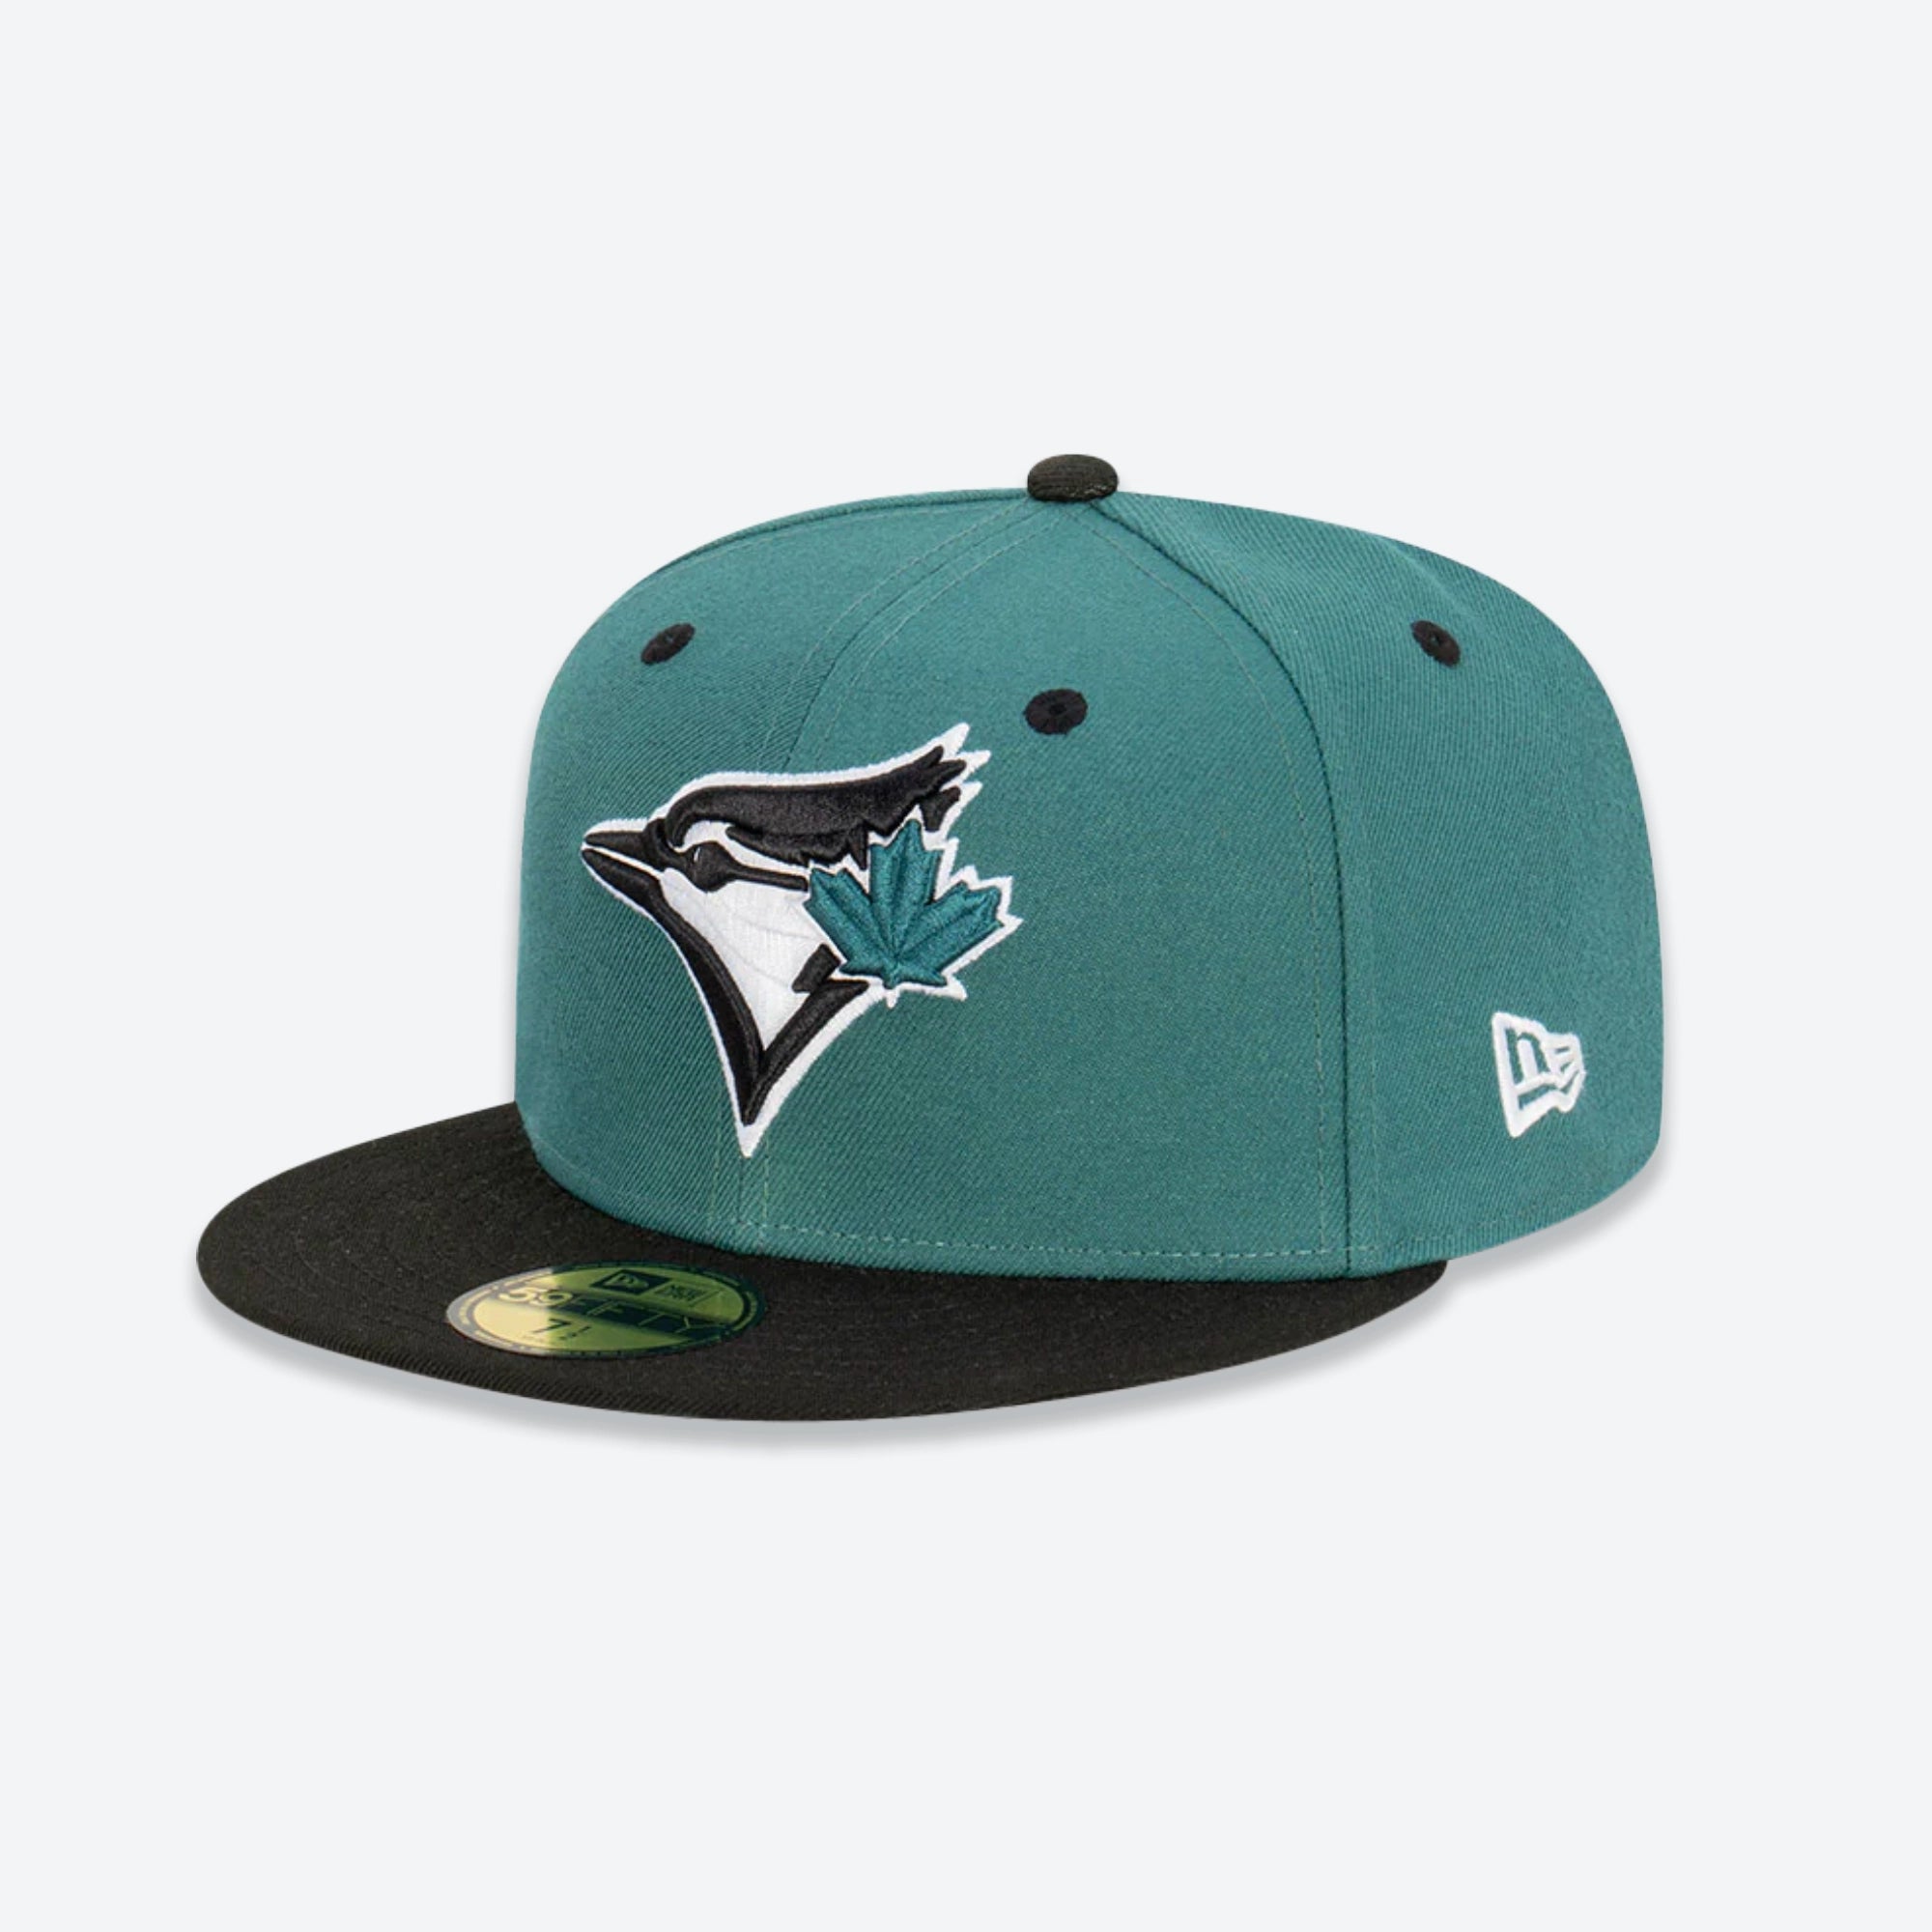 New Era, Accessories, Toronto Blue Jays Black59fifty Fitted Hat